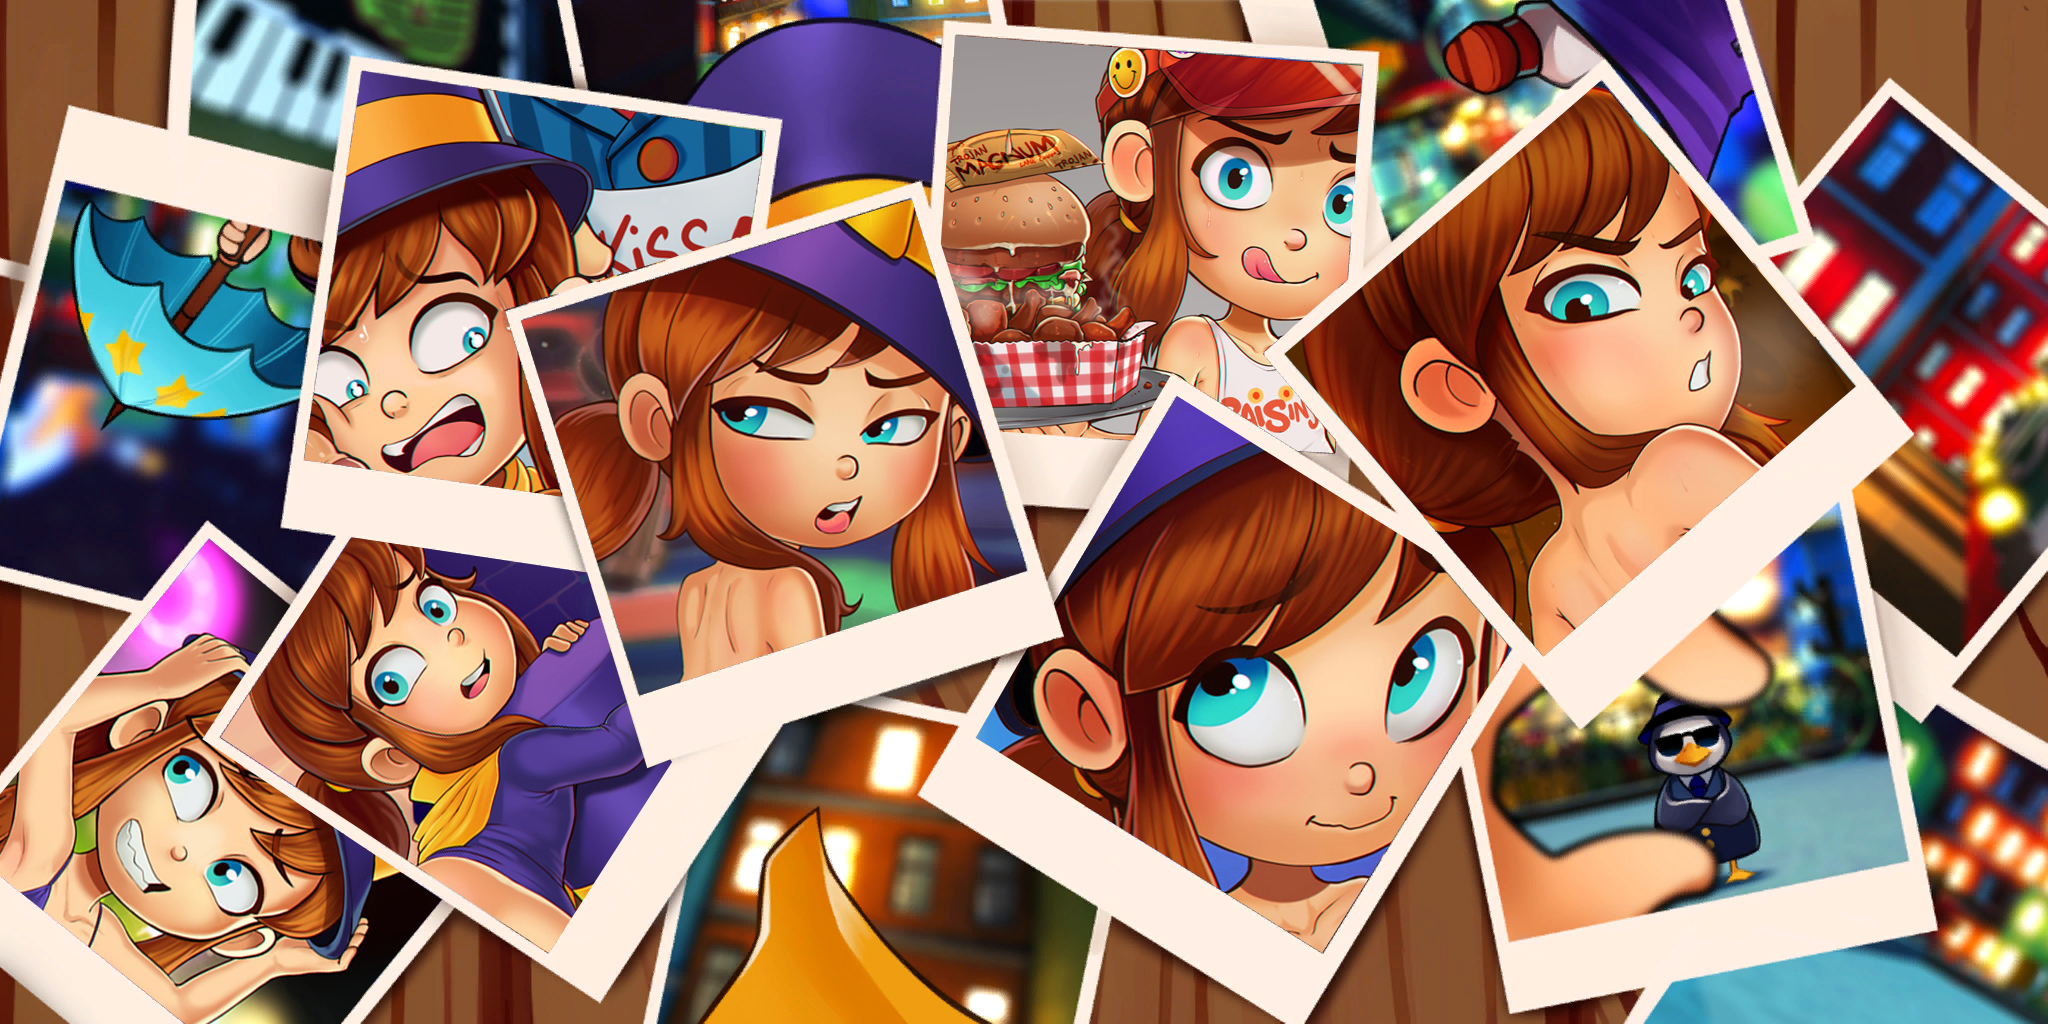 Ms circle rule 34. Шадман a hat in time. Хэт КИД A hat in time Rule 34. Hat in time 34. A hat in time Shadman.